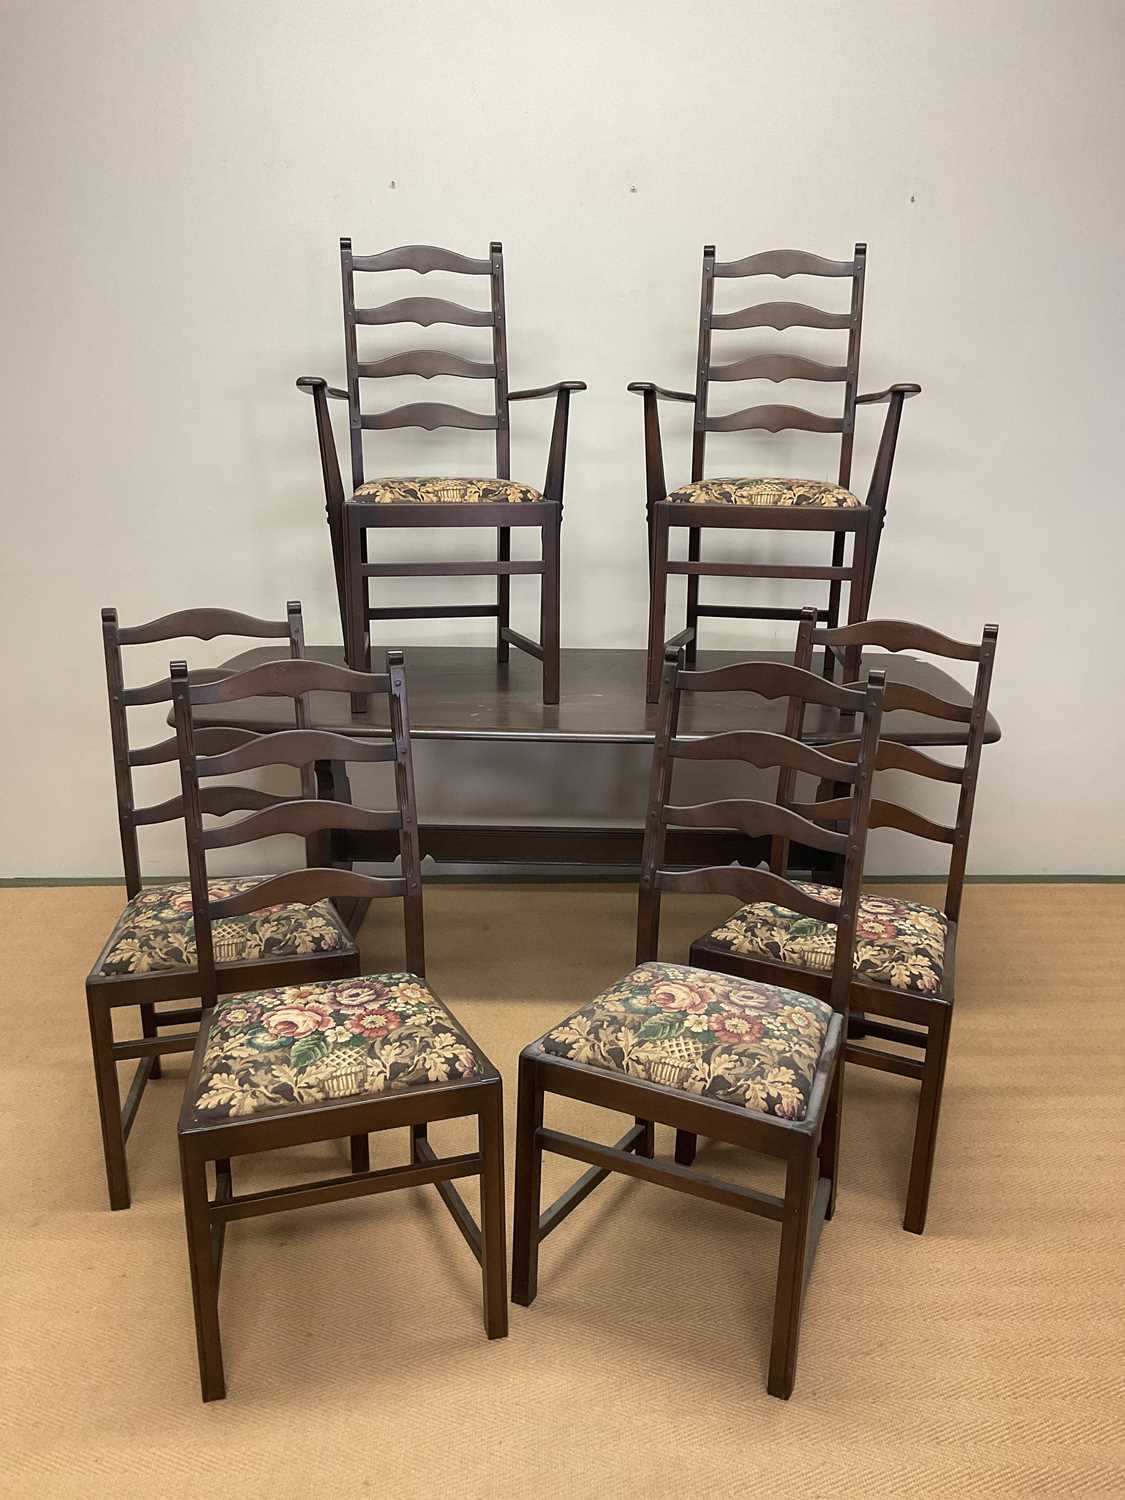 ERCOL; a dark stained table, length 180cm, width 80cm, with six chairs including two carvers with